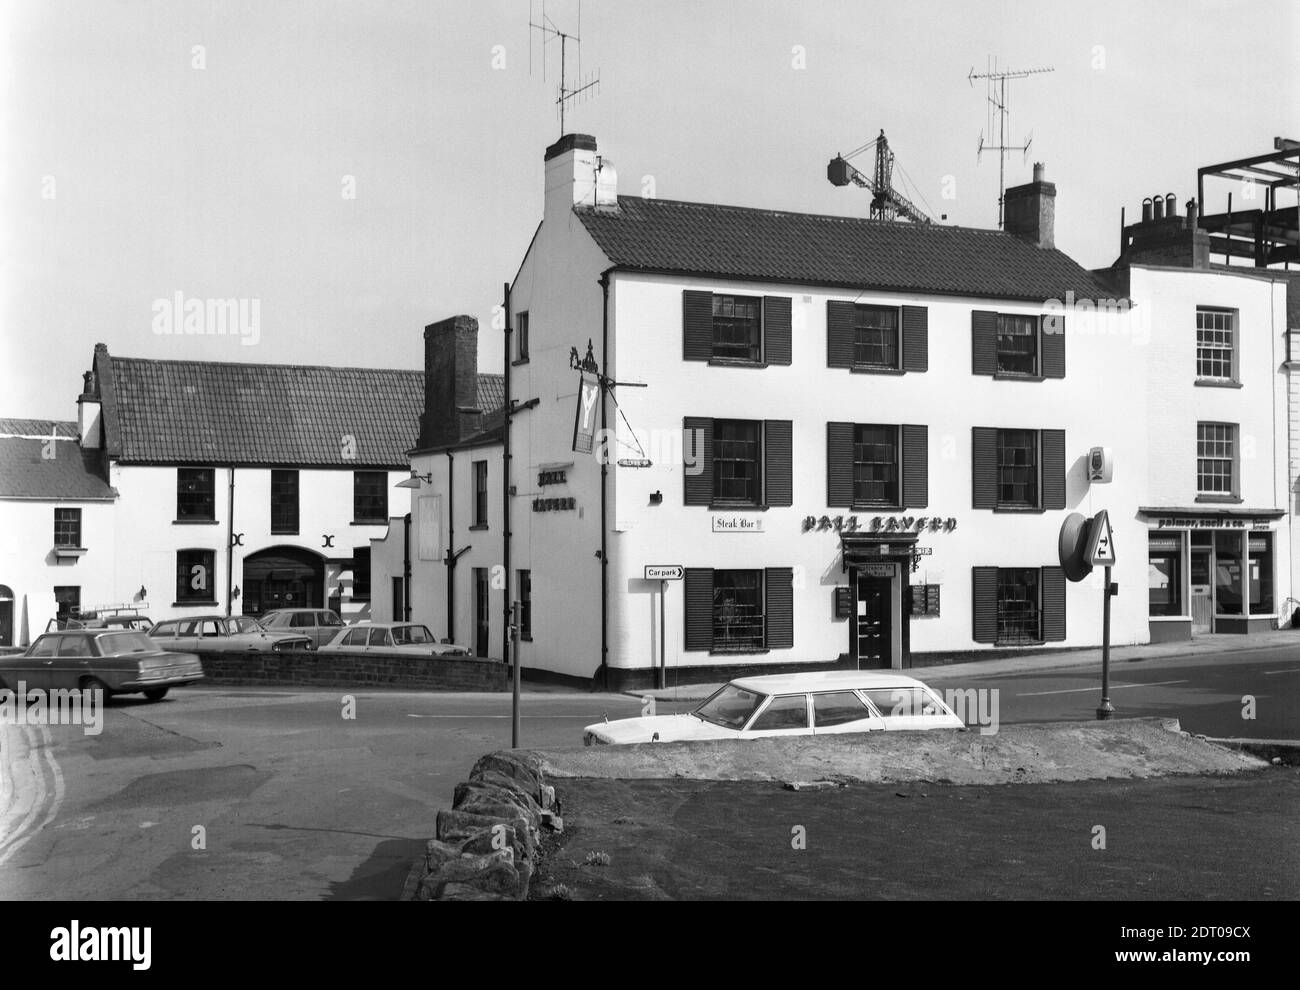 The Pall Tavern, Yeovil in or just before 1975. Earlier this was the Pall Hotel run by Brutton's Beers, her it is the Pall Tavern, a Berni Inn (There is the iconic Berni Inn wine glass next to the words 'Steak Bar' and a Berni projector above the two-way traffic sign). It is believed that under Bass it remained as the Pall Tavern as it is today (2020) and still going strong. Pall Tavern Yeovil in 1975 number 0285 Stock Photo